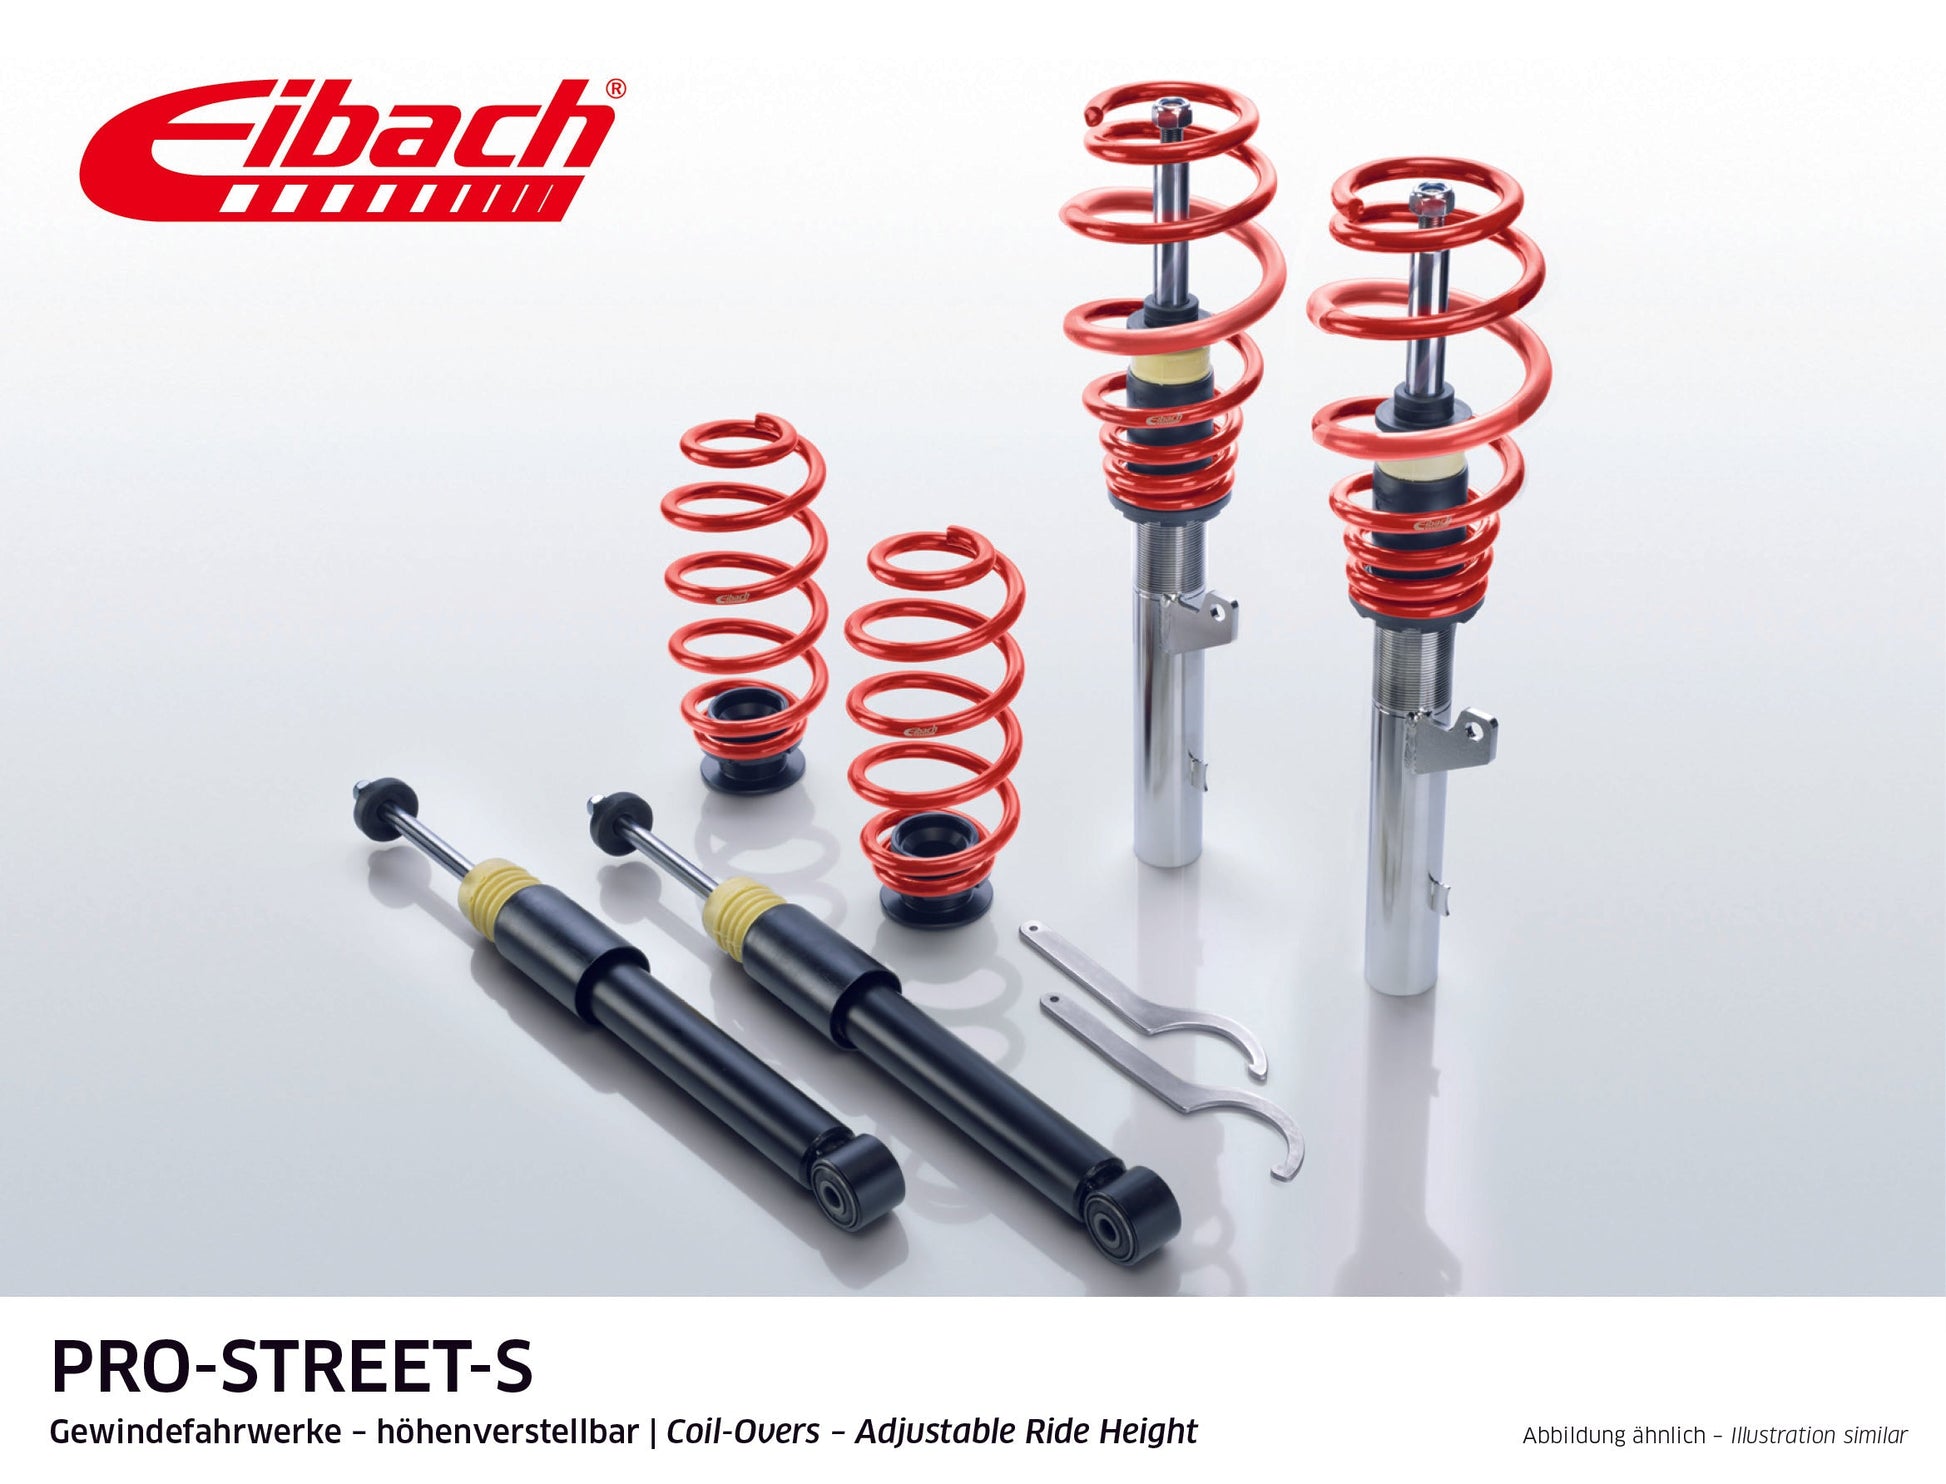 Eibach Pro-Street Coilover (PSS65-15-021-15-22) at £1129.38